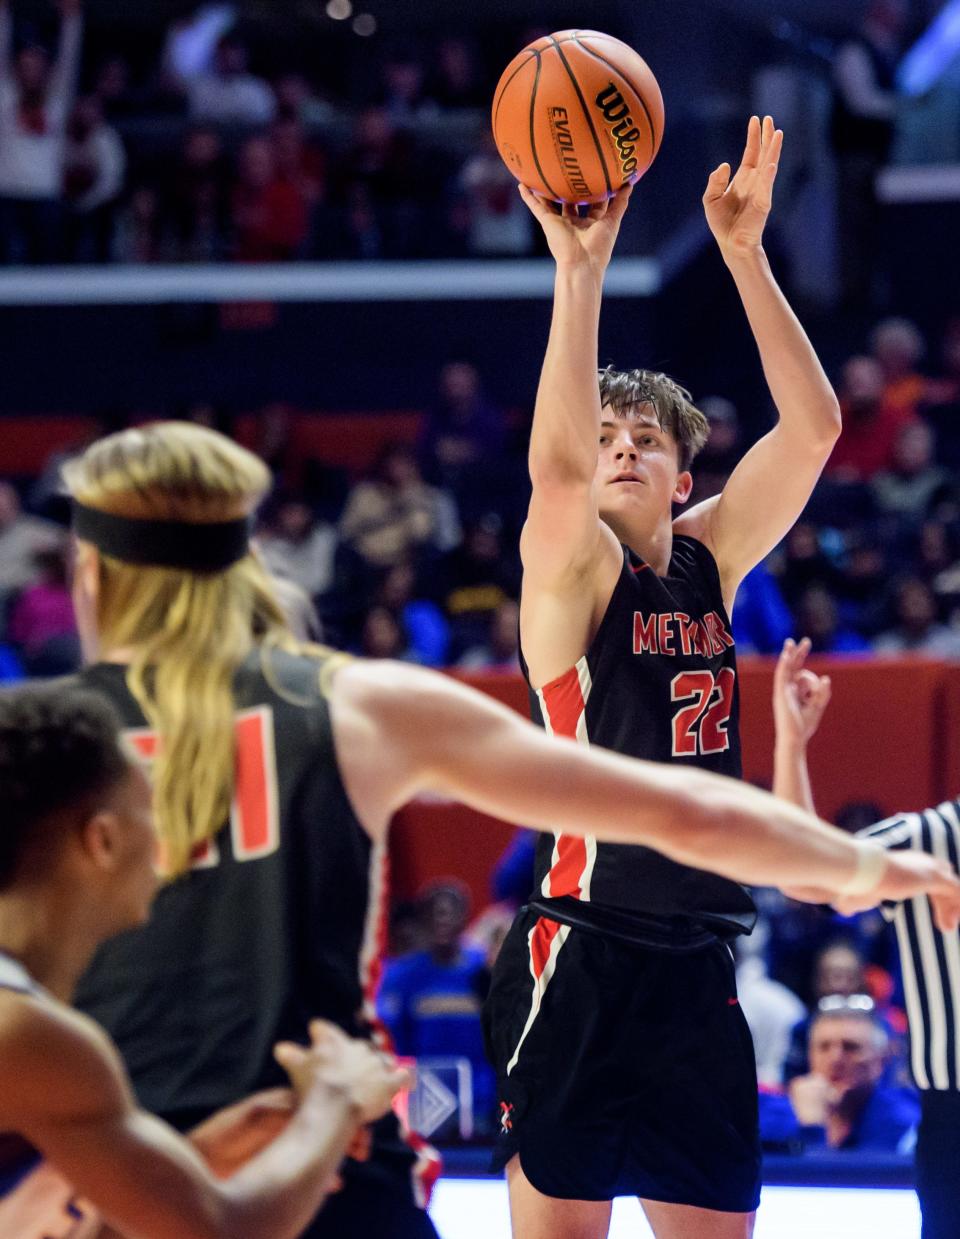 Metamora's Tyson Swanson shoots a three-pointer against Chicago Simeon in the second half of the Class 3A basketball state title game Saturday, March 11, 2023 at State Farm Center in Champaign. The Redbirds took the title 46-42.